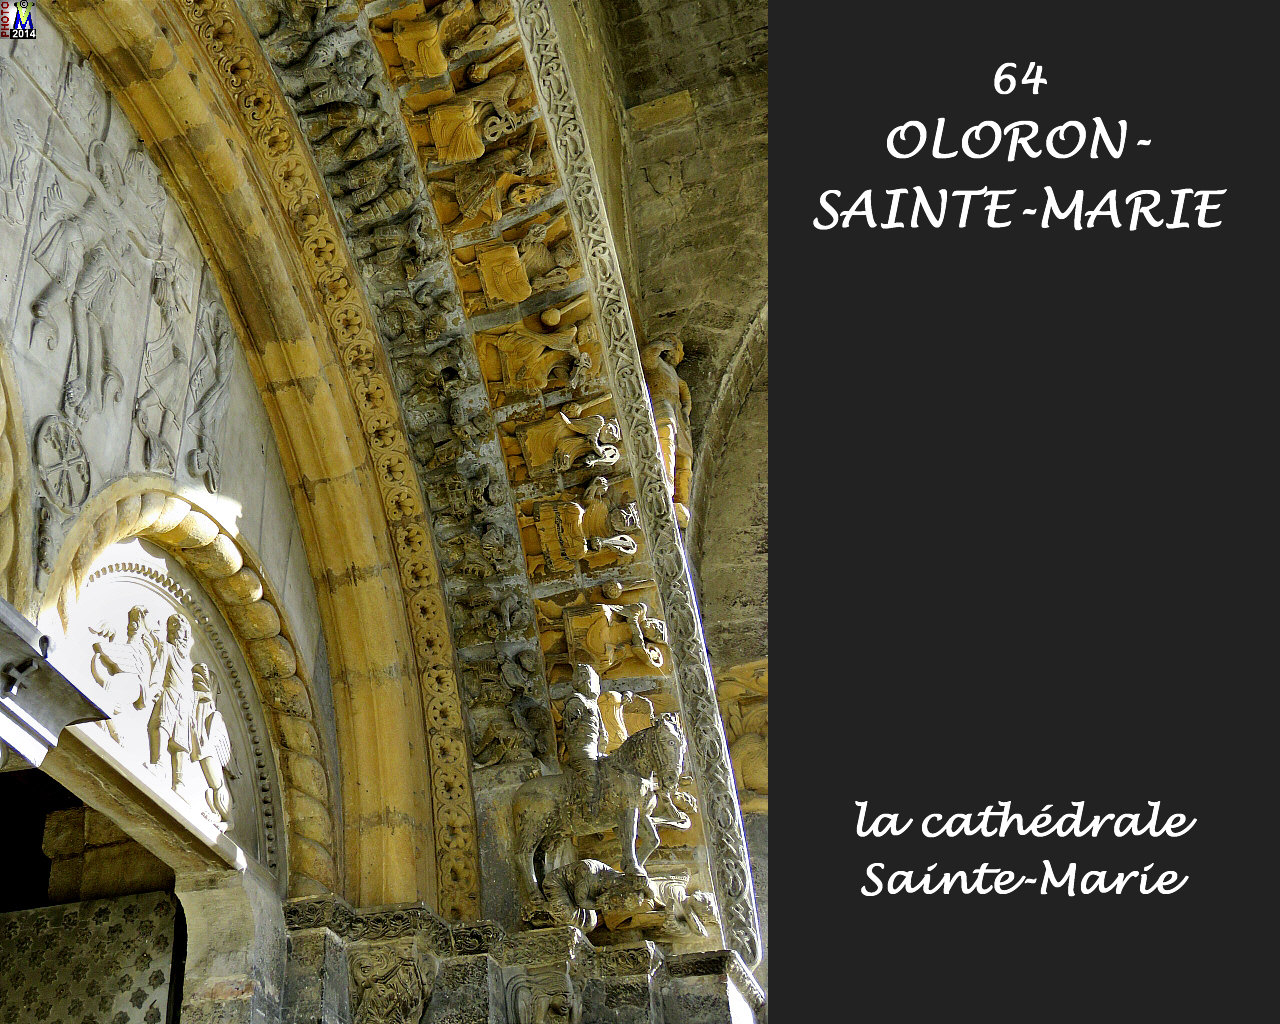 64OLORON-STE-MARIE_cathedrale_160.jpg